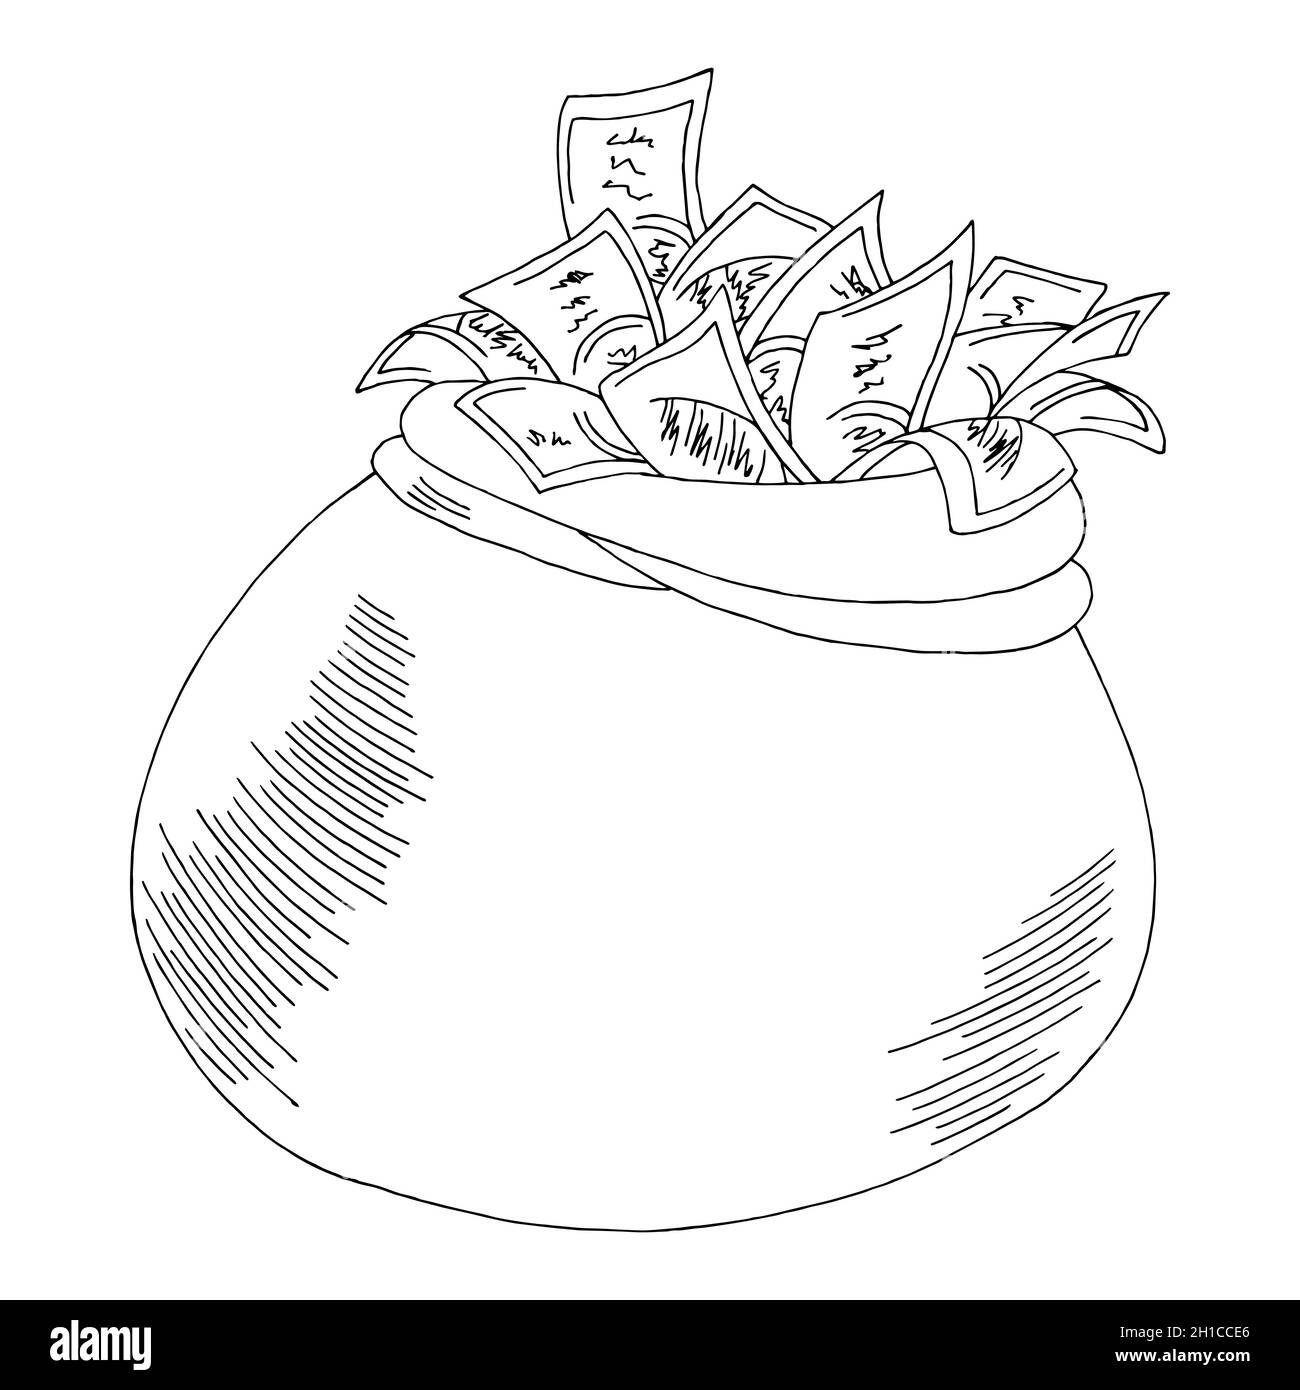 Money Bag coloring page | Free Printable Coloring Pages